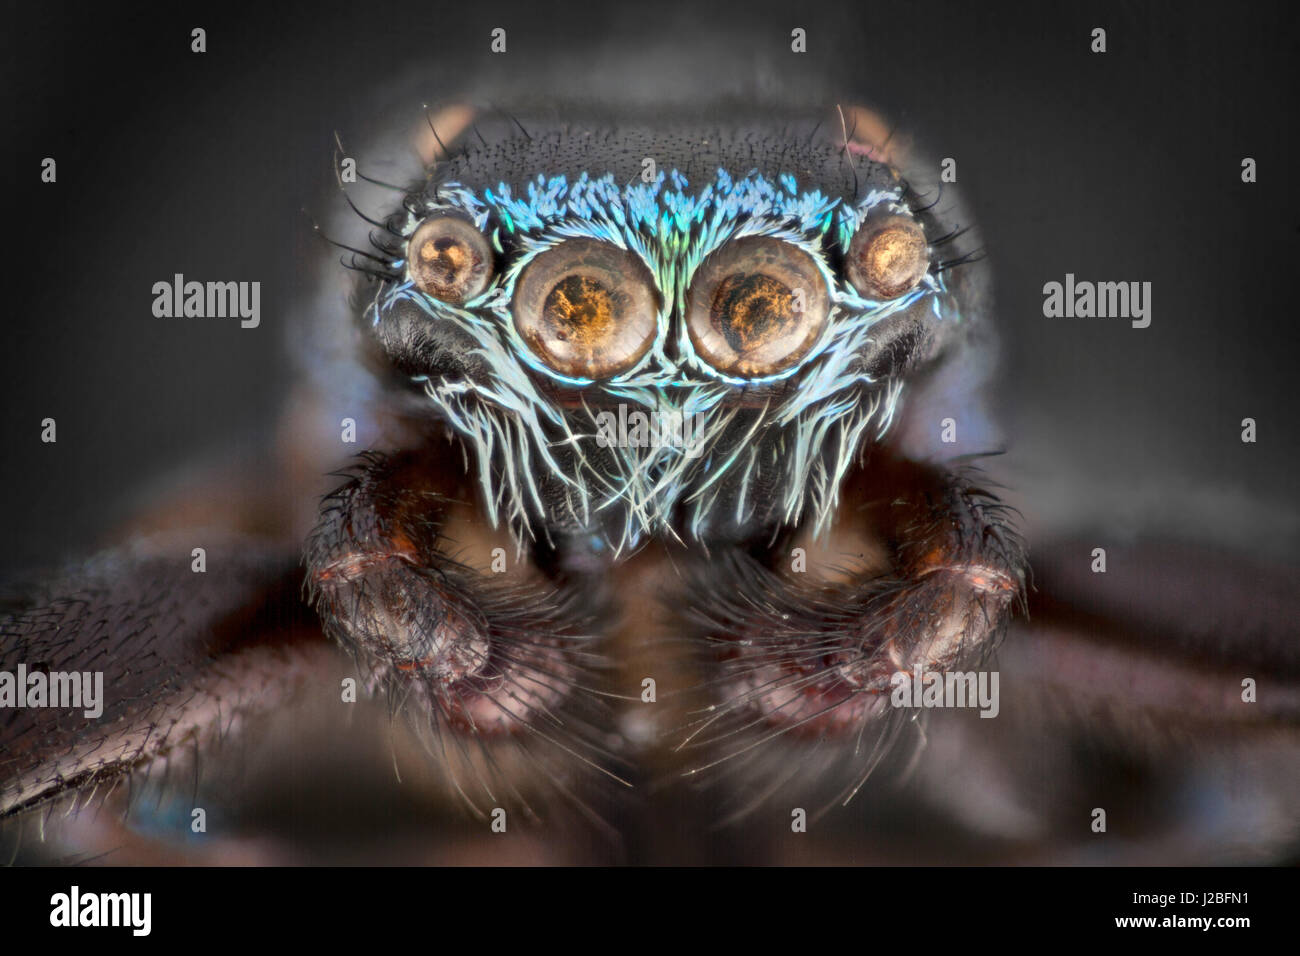 Malaysia jumping spider, Salticidae, alta macro 'stacked' immagine, irridescent come scale Foto Stock